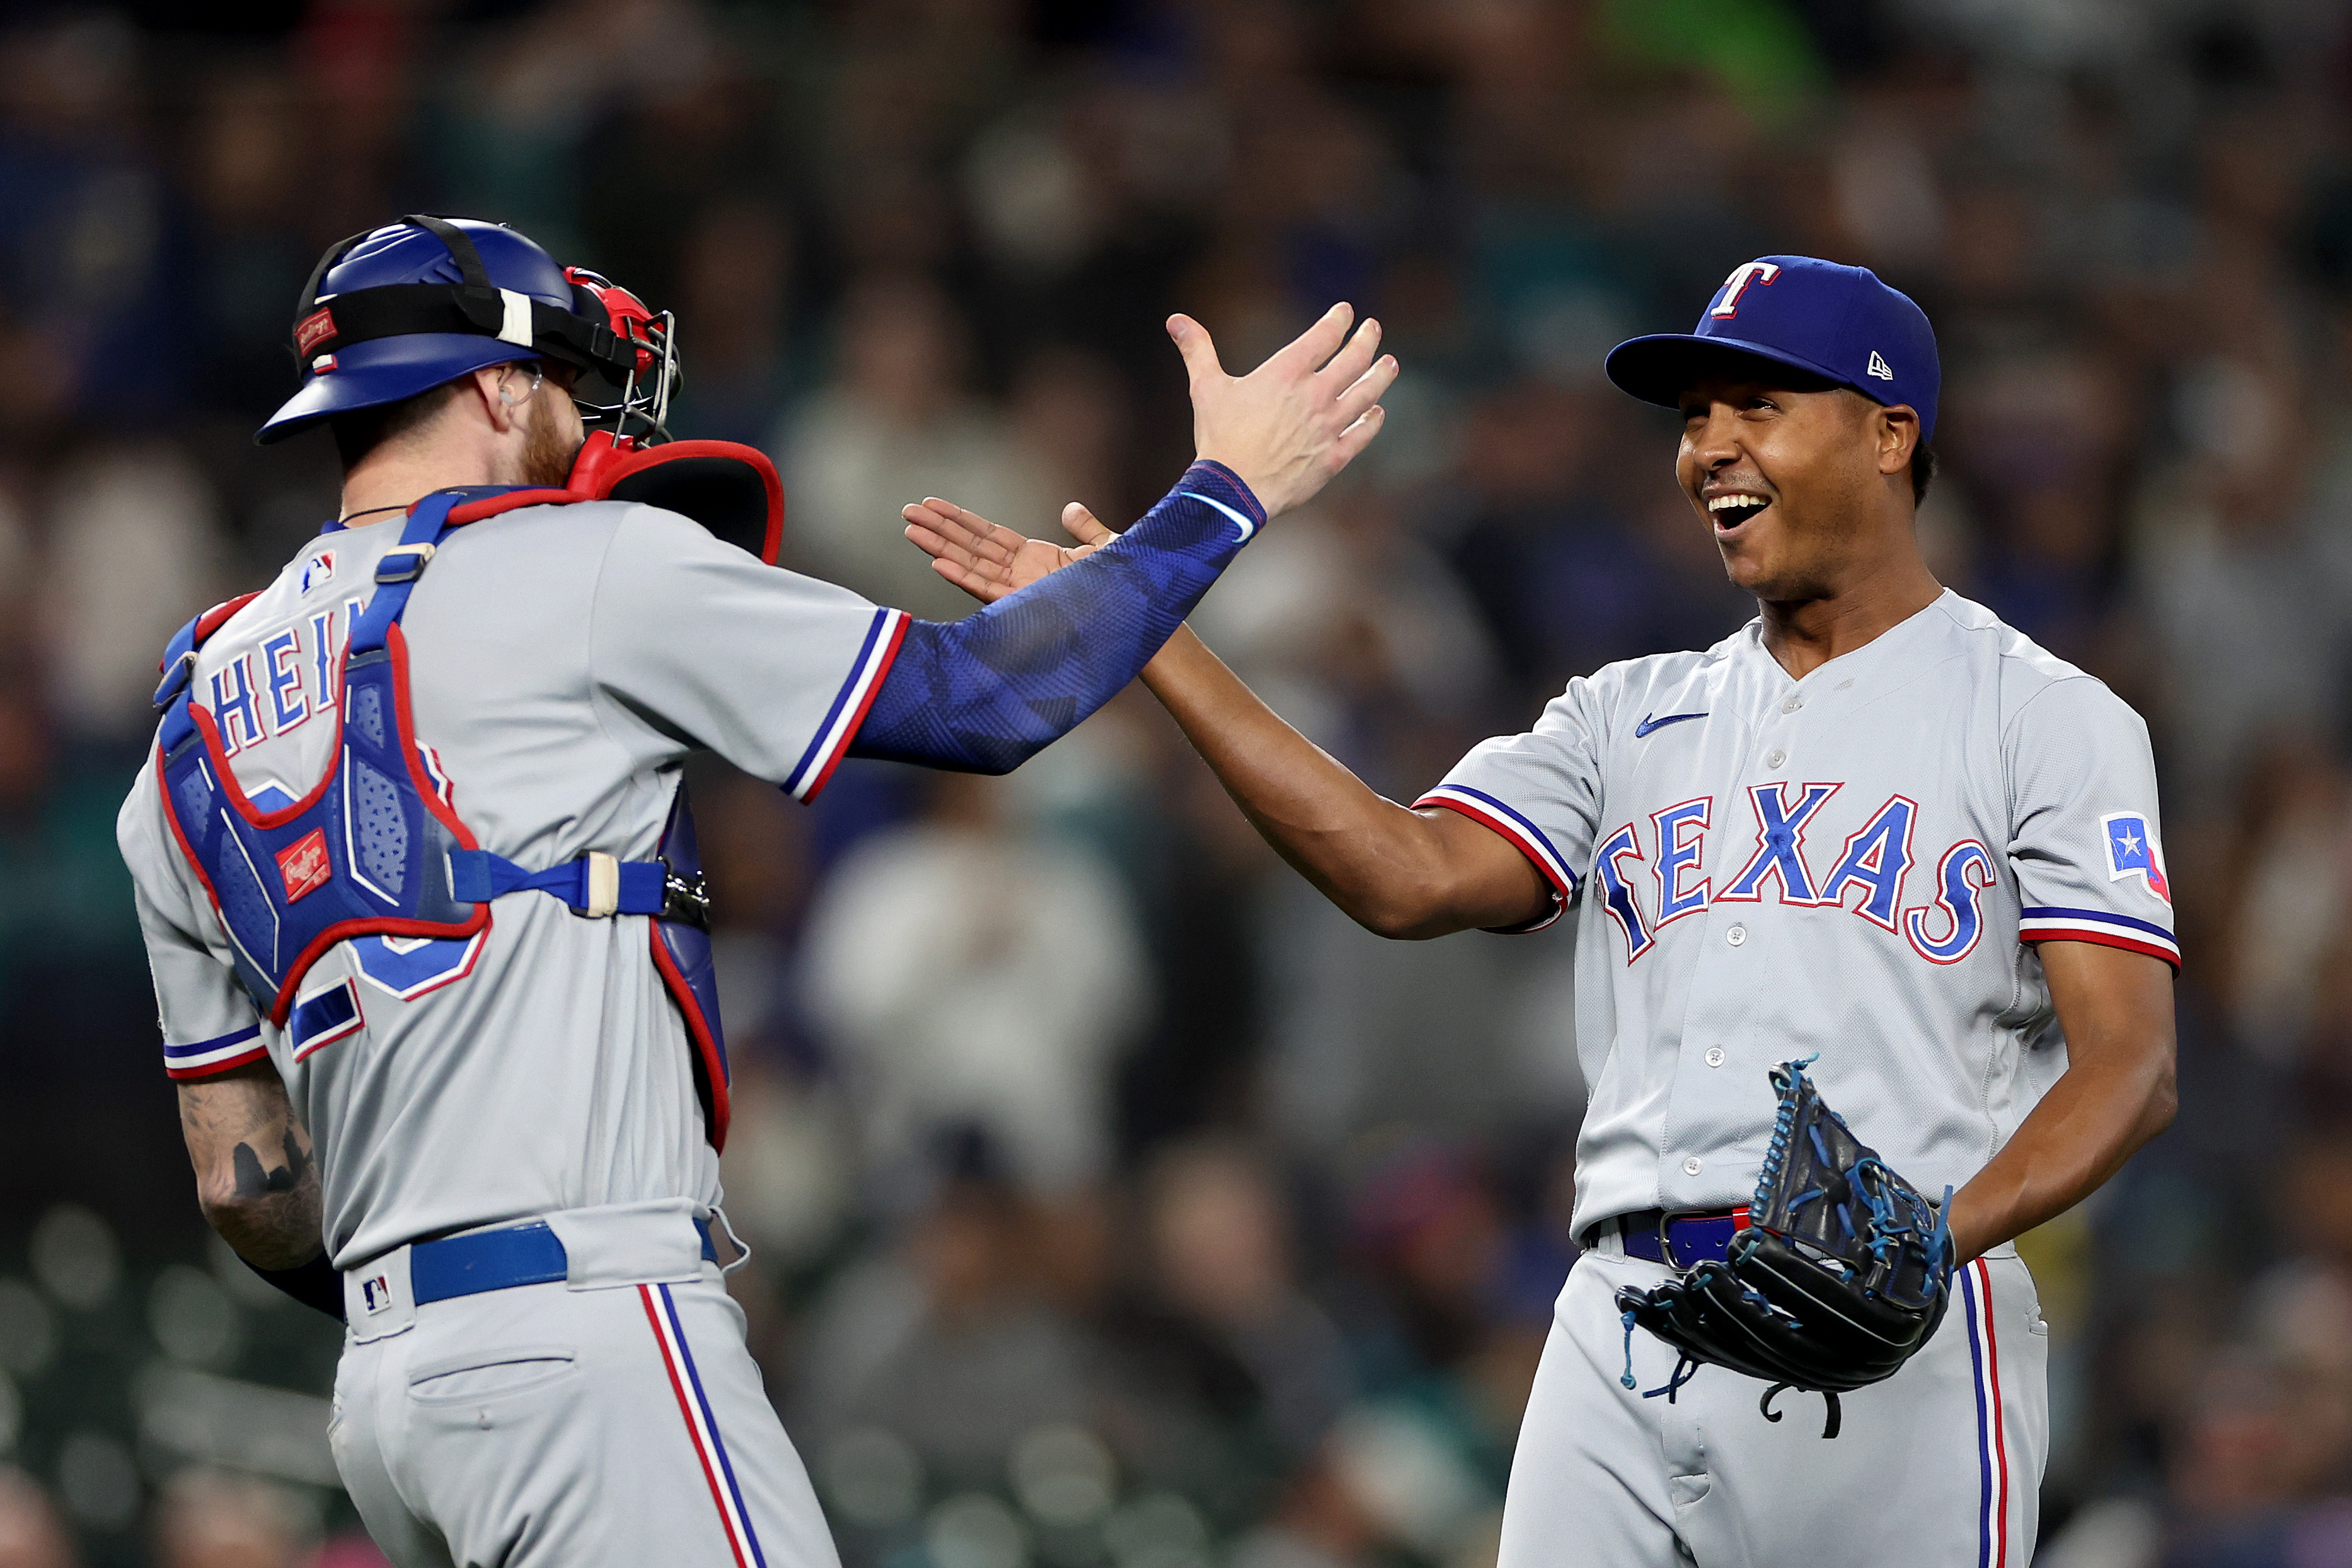 Rangers wrap up first playoff berth since 2016, help eliminate